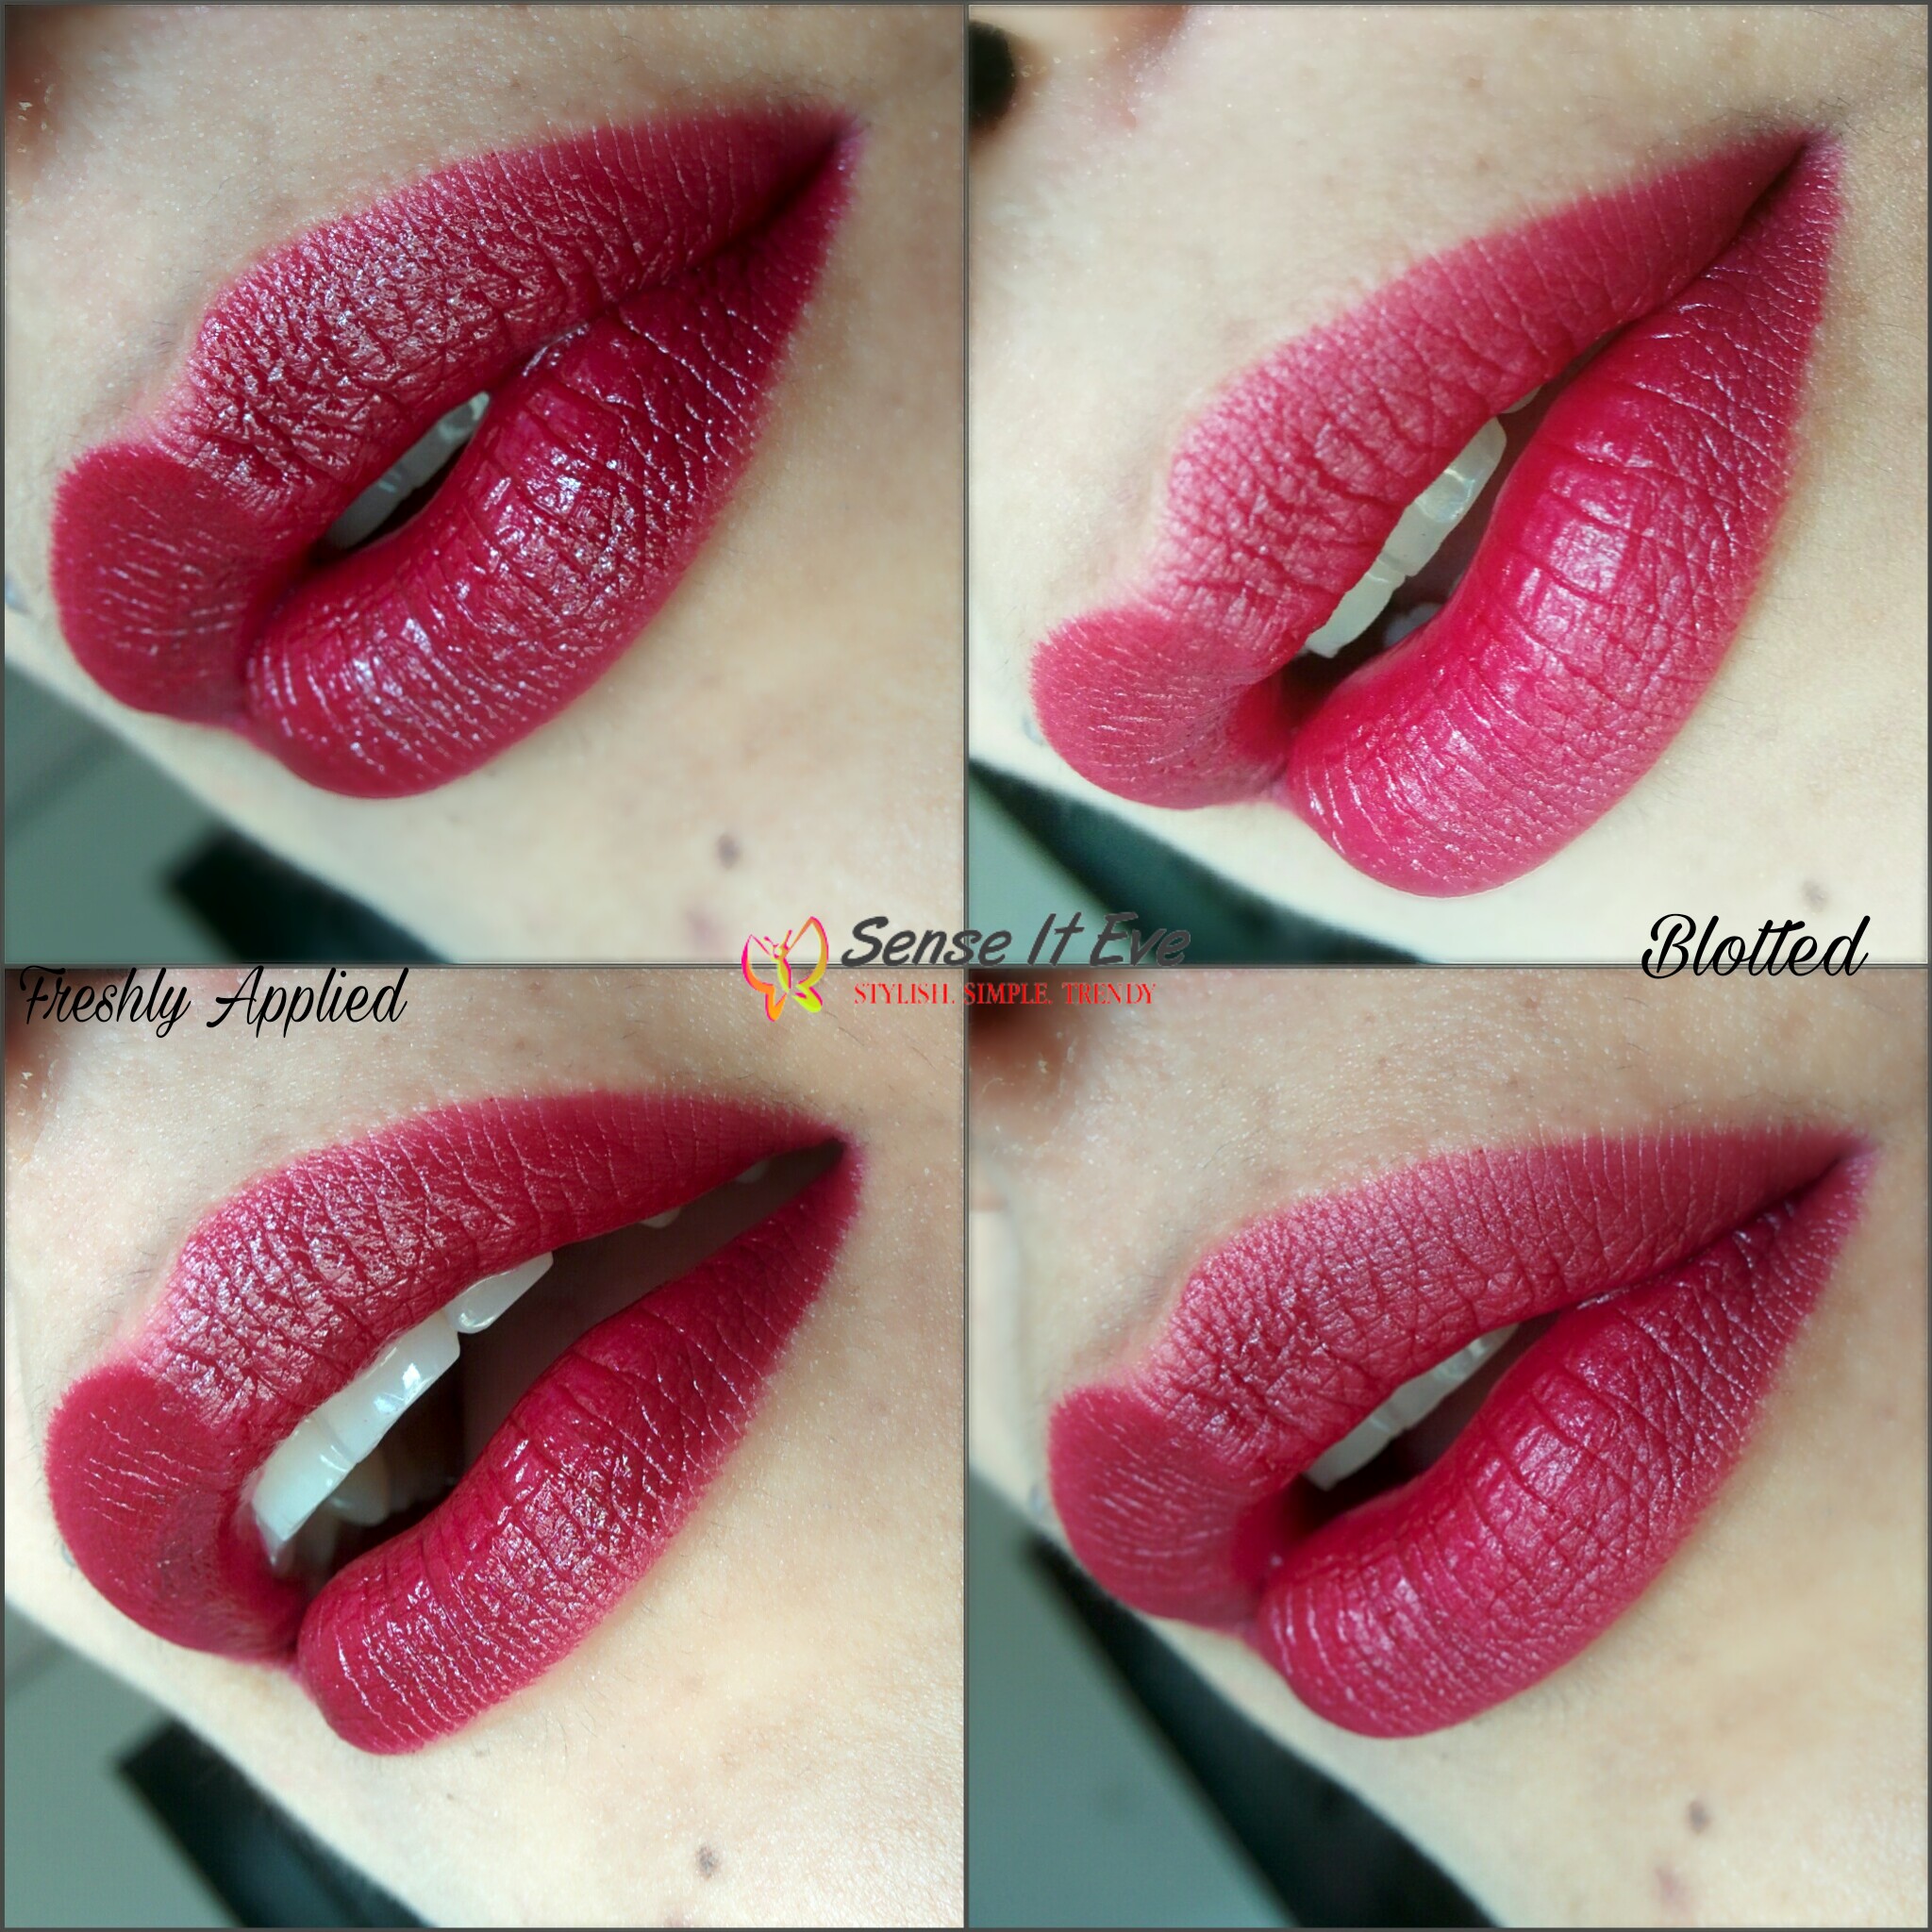 Nykaa So Matte Lipstick Wicked Wine Swatches Sense It Eve Nykaa So Matte Lipstick : Review & Swatches